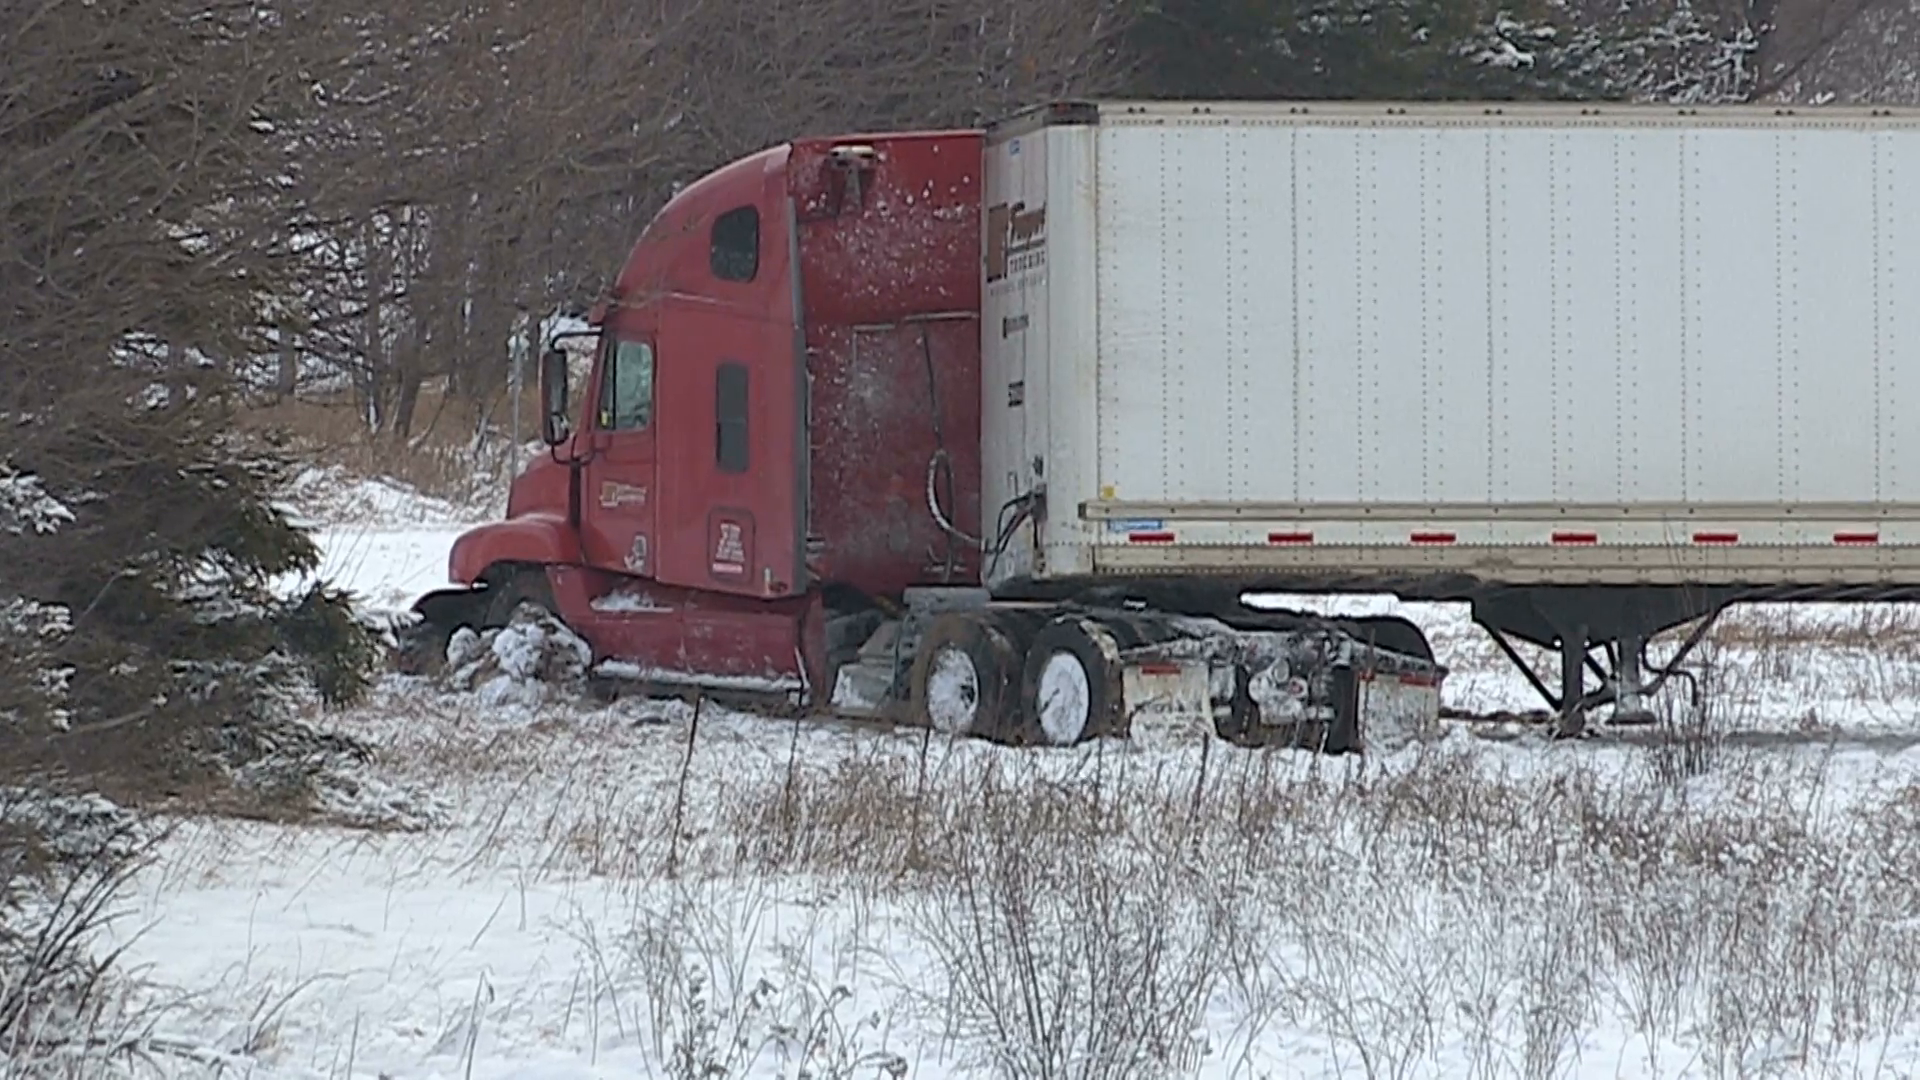 Tractor trailer truck crash and in ditch on icy road after blizzard ...